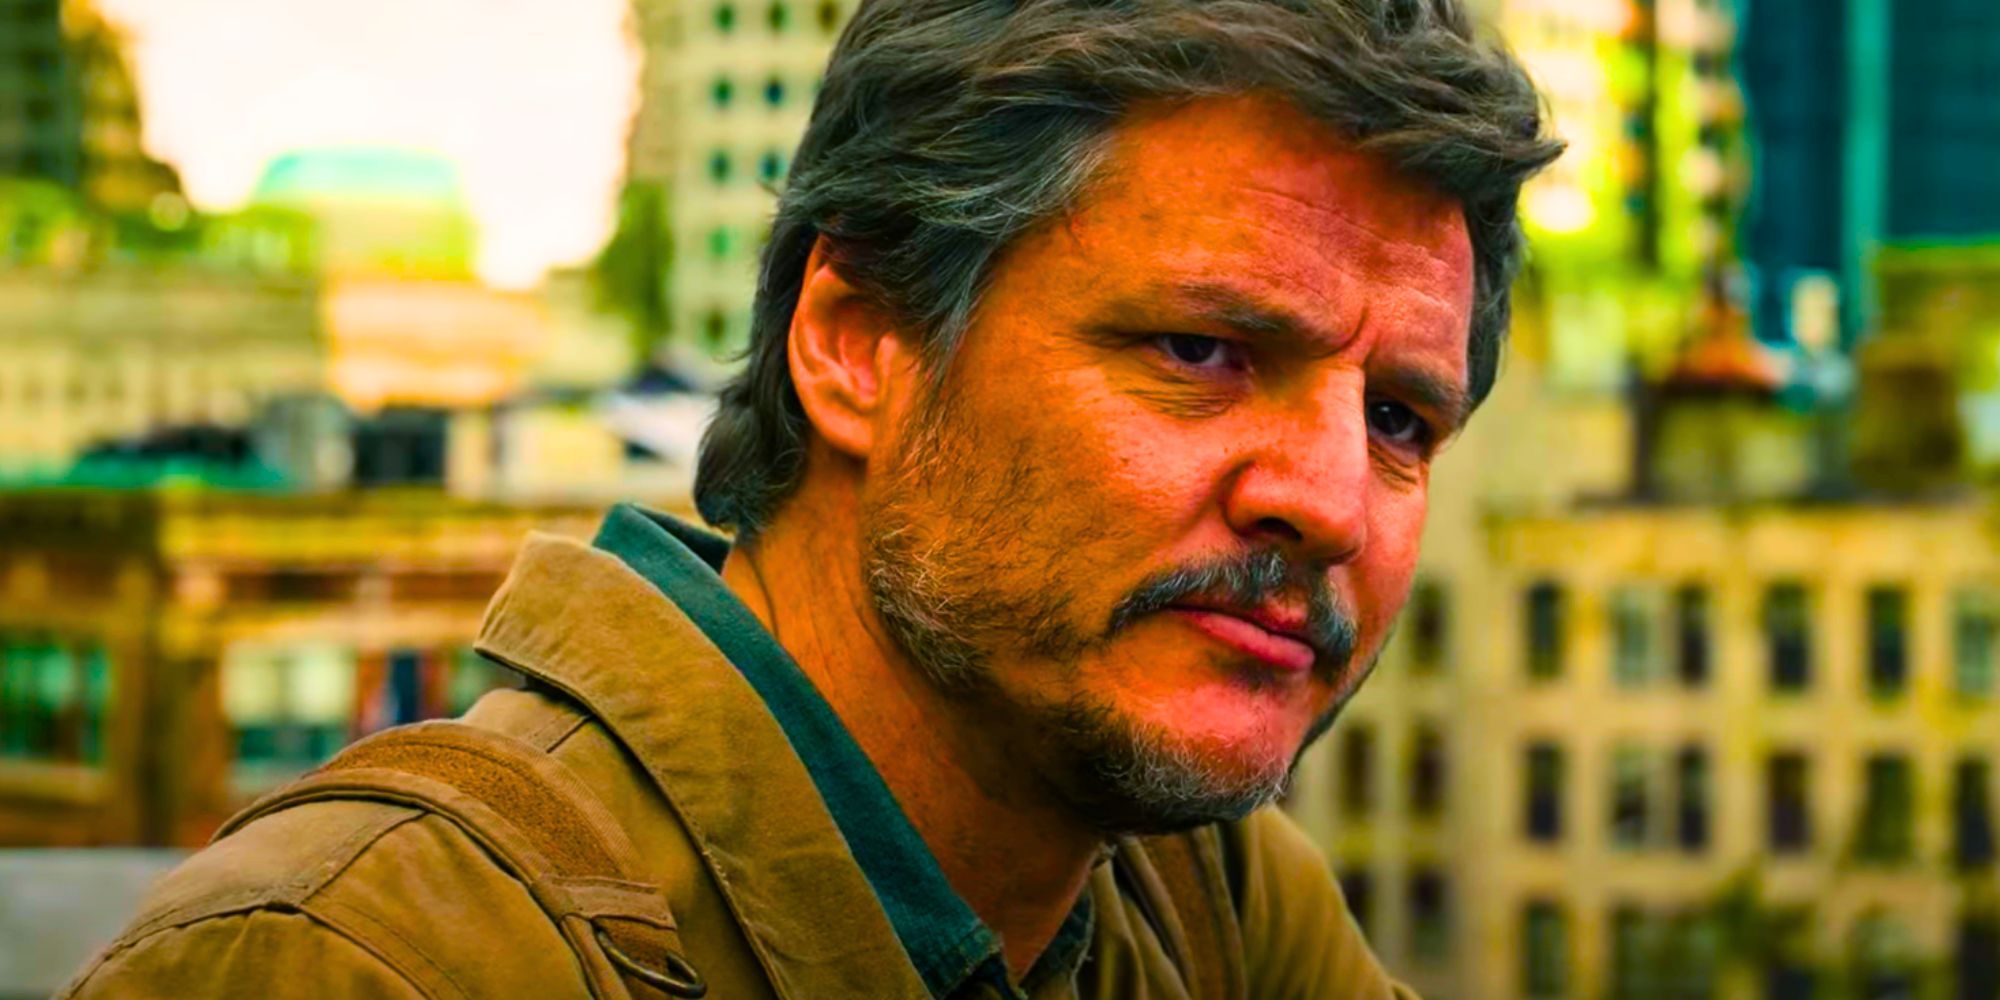 Pedro Pascal looking serious as Joel Miller in The Last of Us